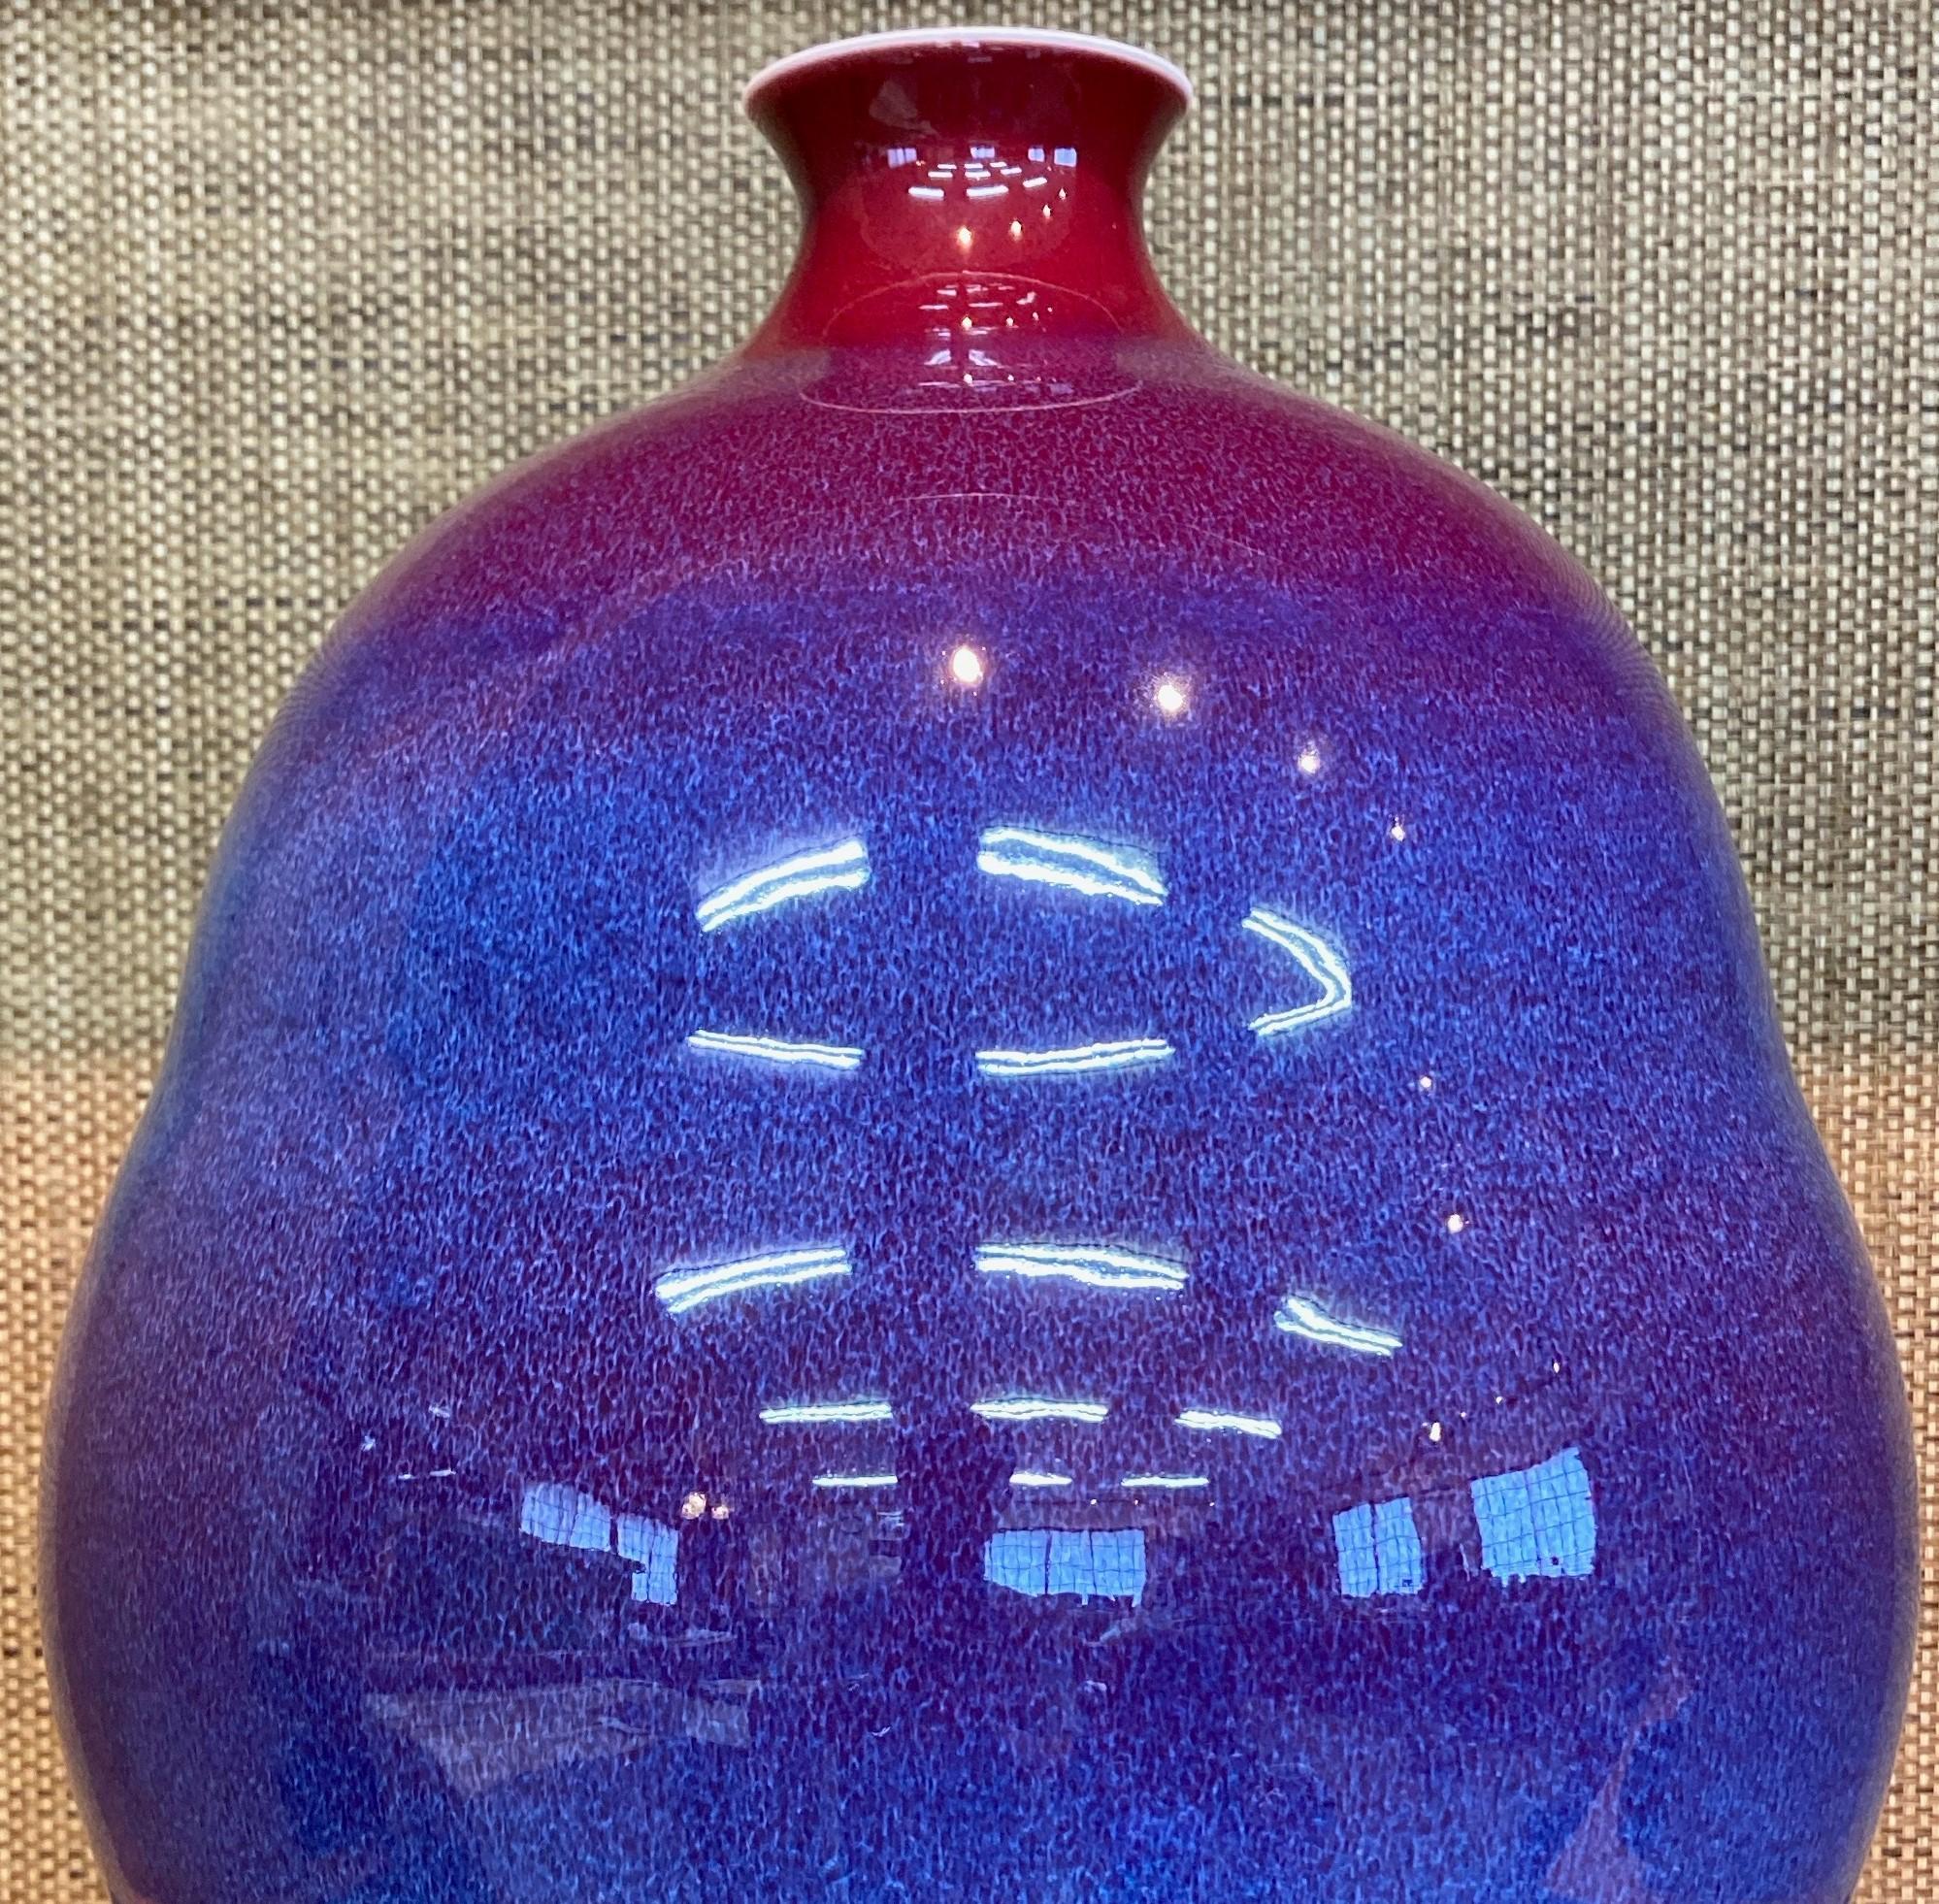 Exquisite decorative porcelain vase, hand-glazed in vivid red and e on a stunning bottle shaped body, from the extraordinary signature Galaxy series by highly celebrated award-winning master porcelain artist of the Arita-Imari region of Japan. This